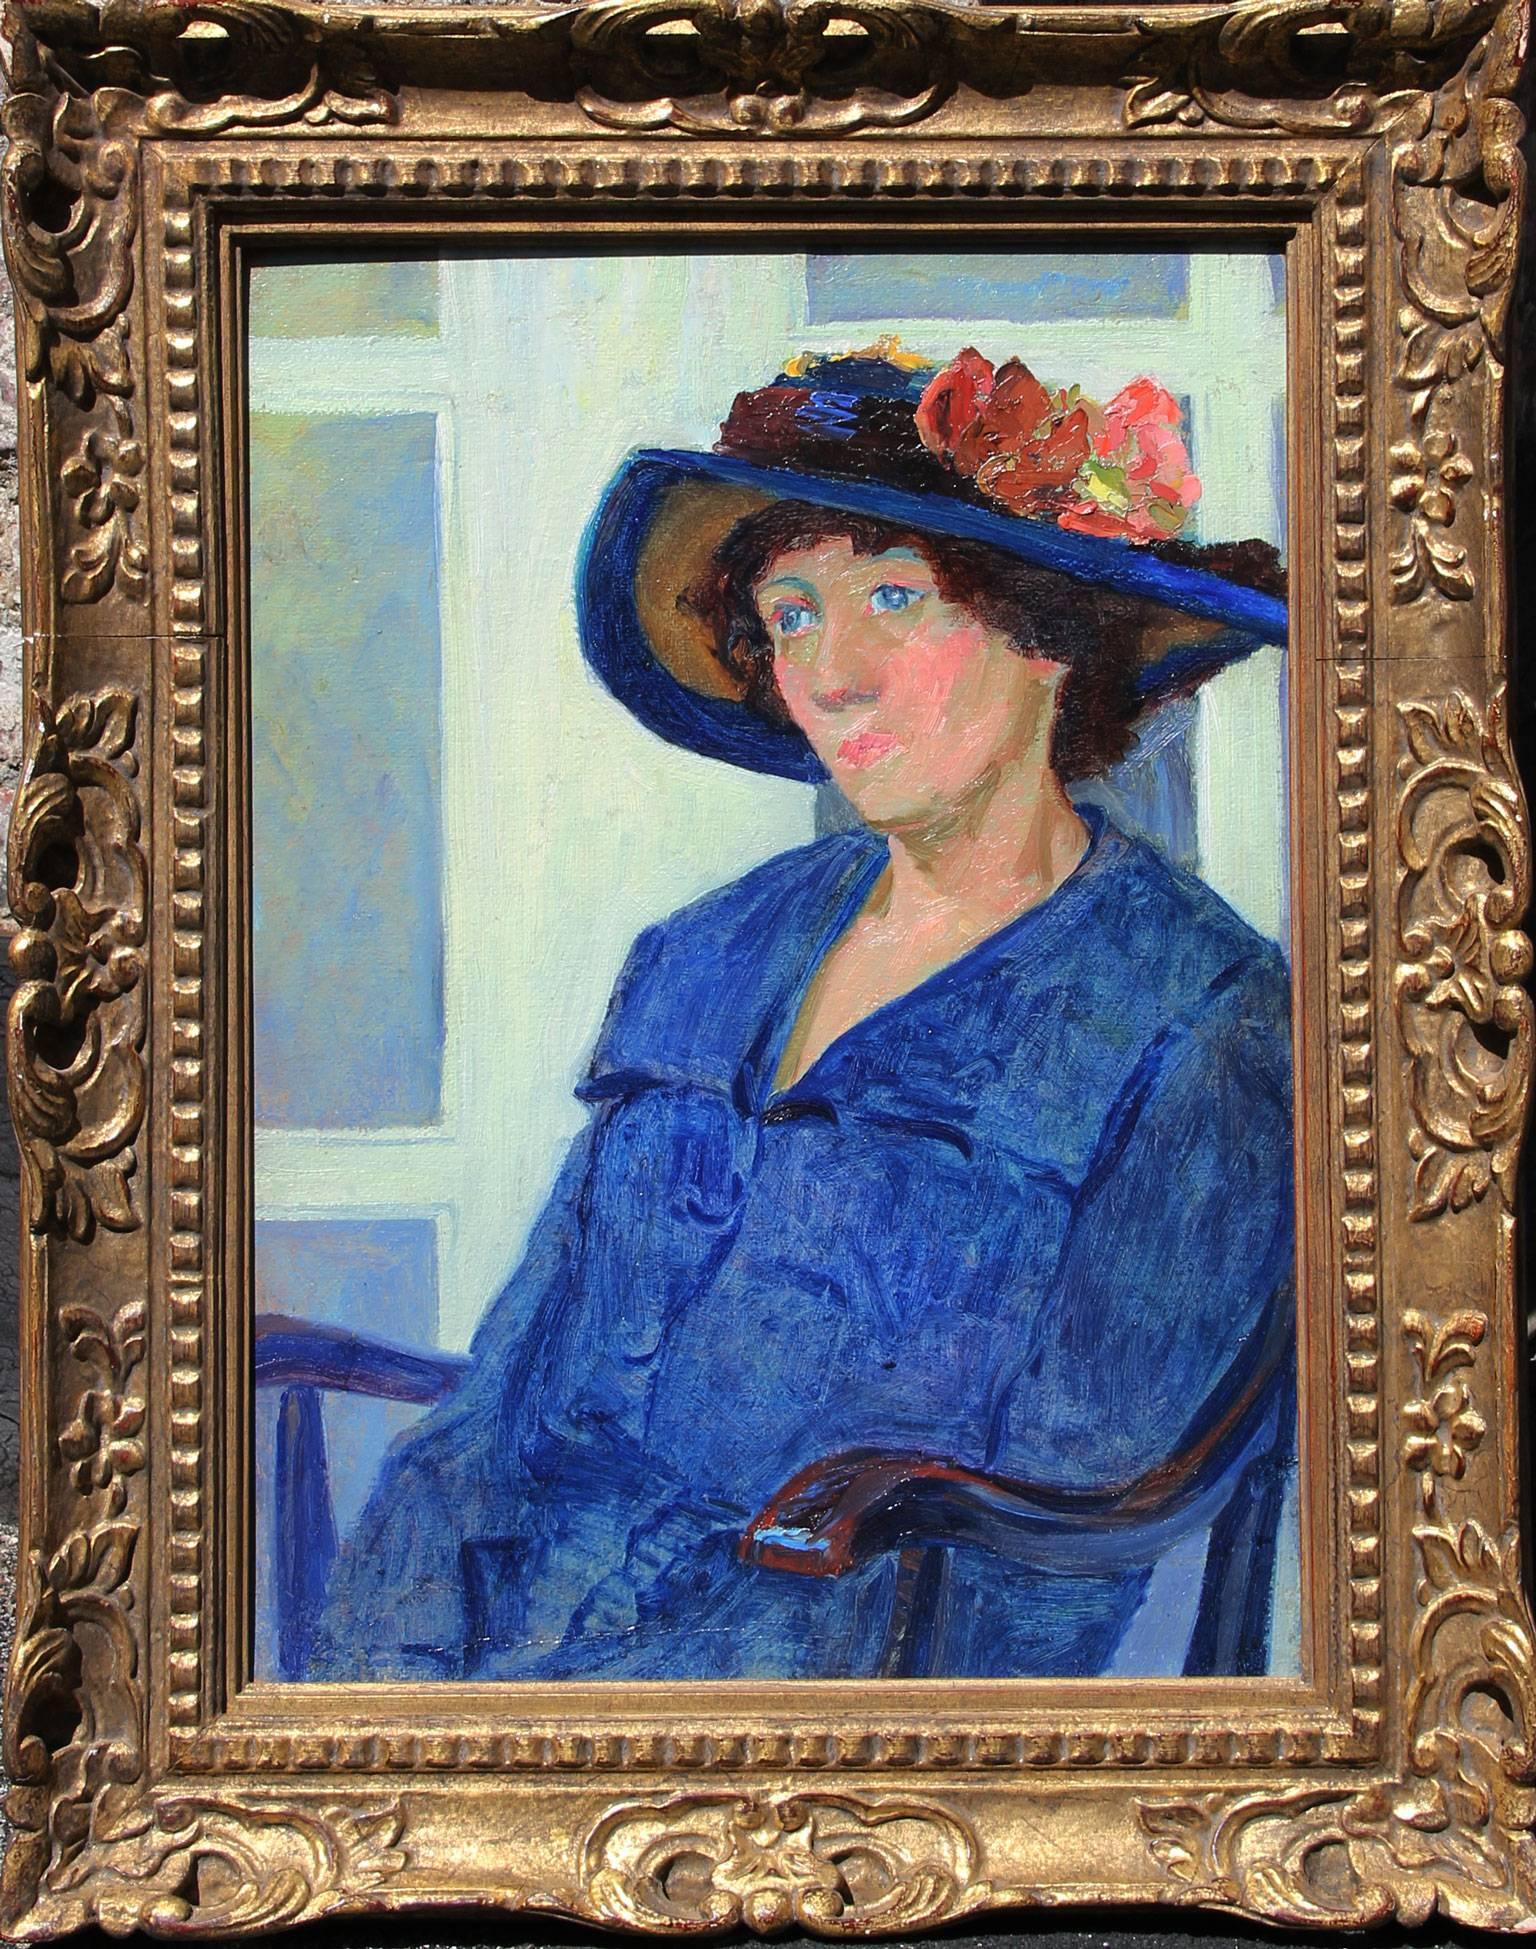 LOUISE ELEANOR ZARING
American, 1872–1970

A Lady in Blue

Oil on canvas
22 x 18 inches (55.6 x 45.8 cm)
Framed: 28¼ x 22½ inches (71.9 x 57 cm)

Provenance
Estate of the Artist
Bequeathed to The Miami Art League
Acquired from the above,